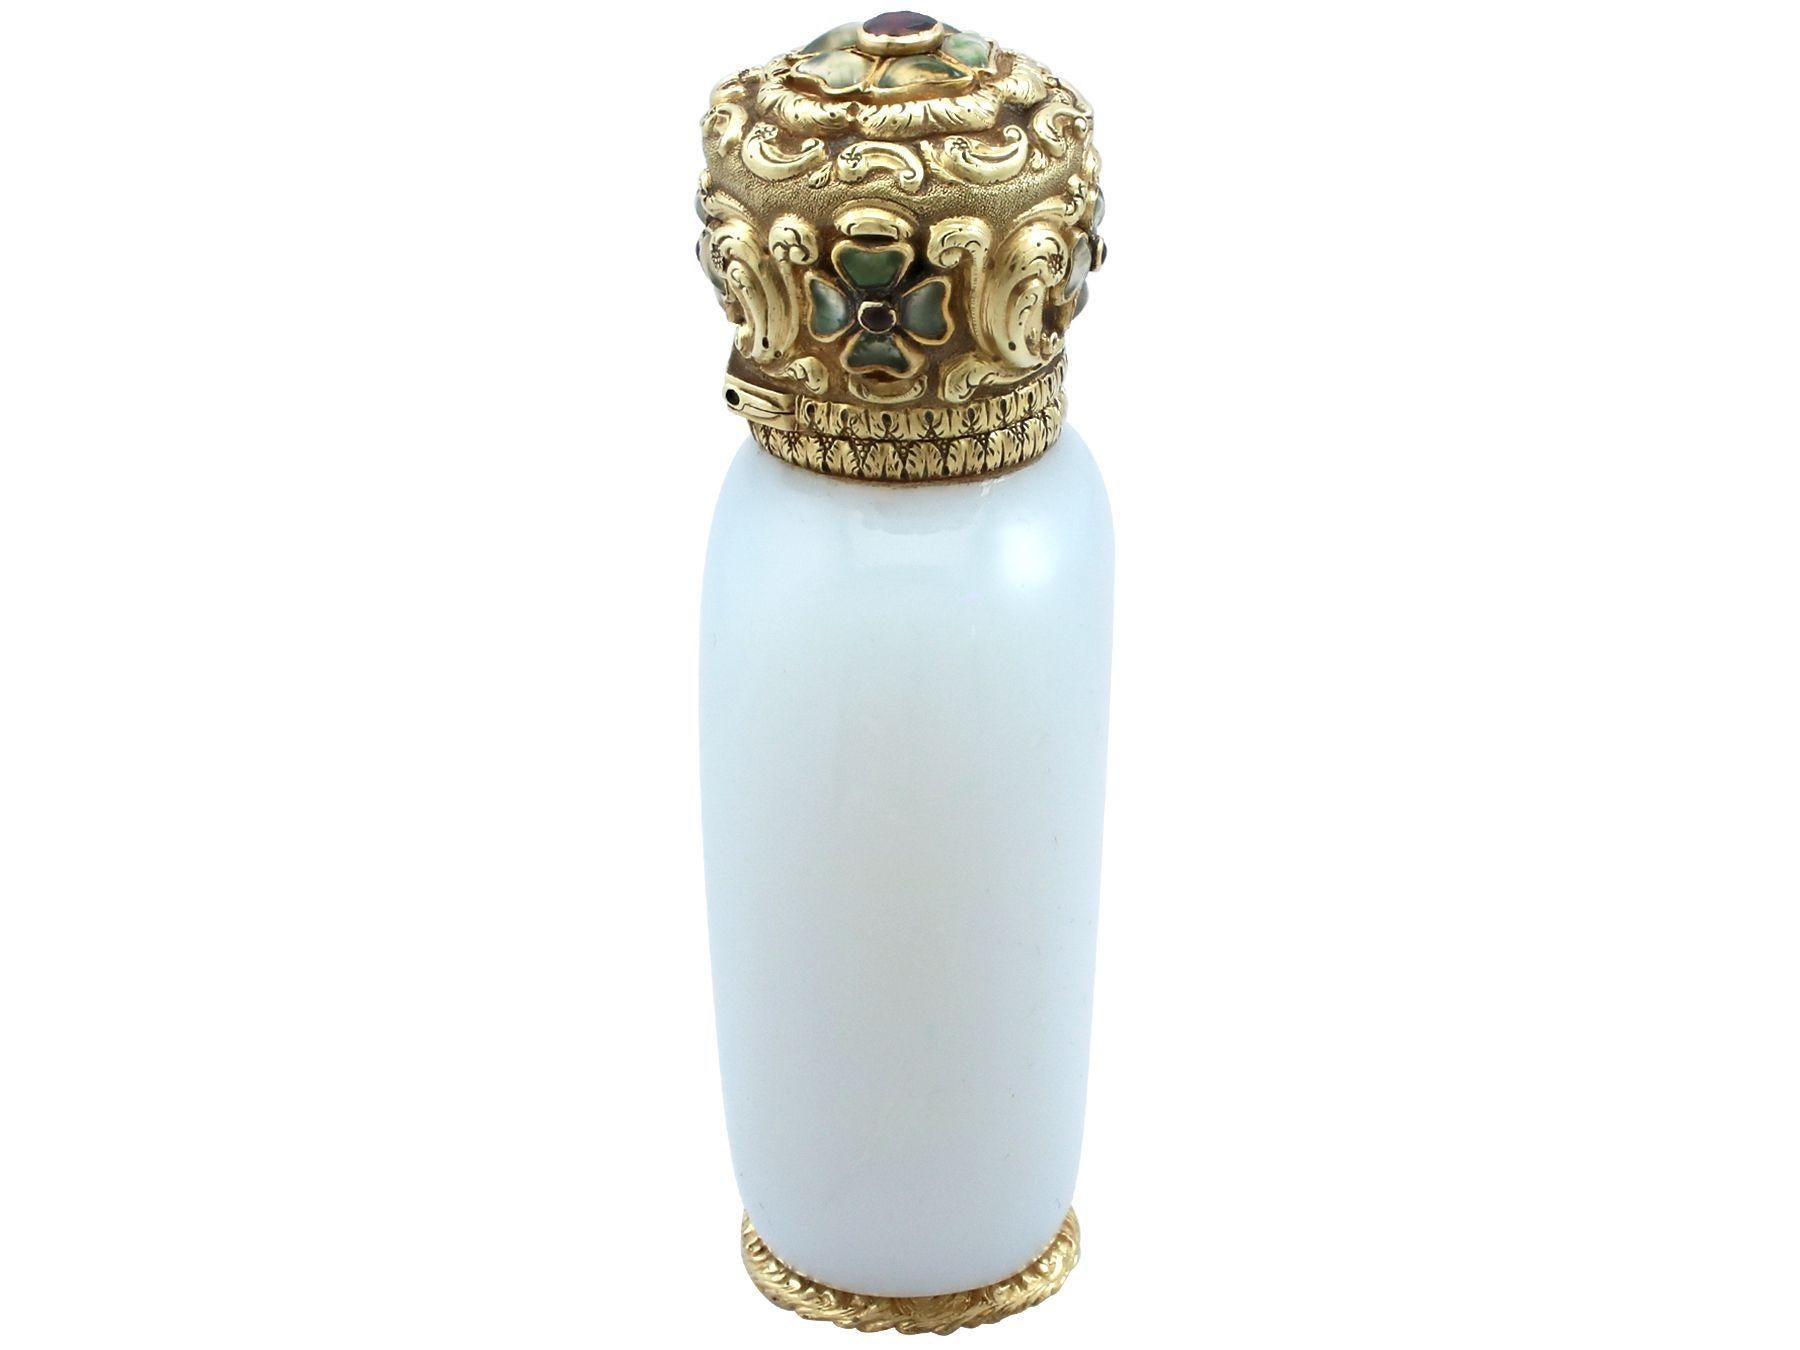 Antique Yellow Gold, Garnet, Ruby, Hardstone and Glass Scent Bottle, circa 1845 For Sale 2